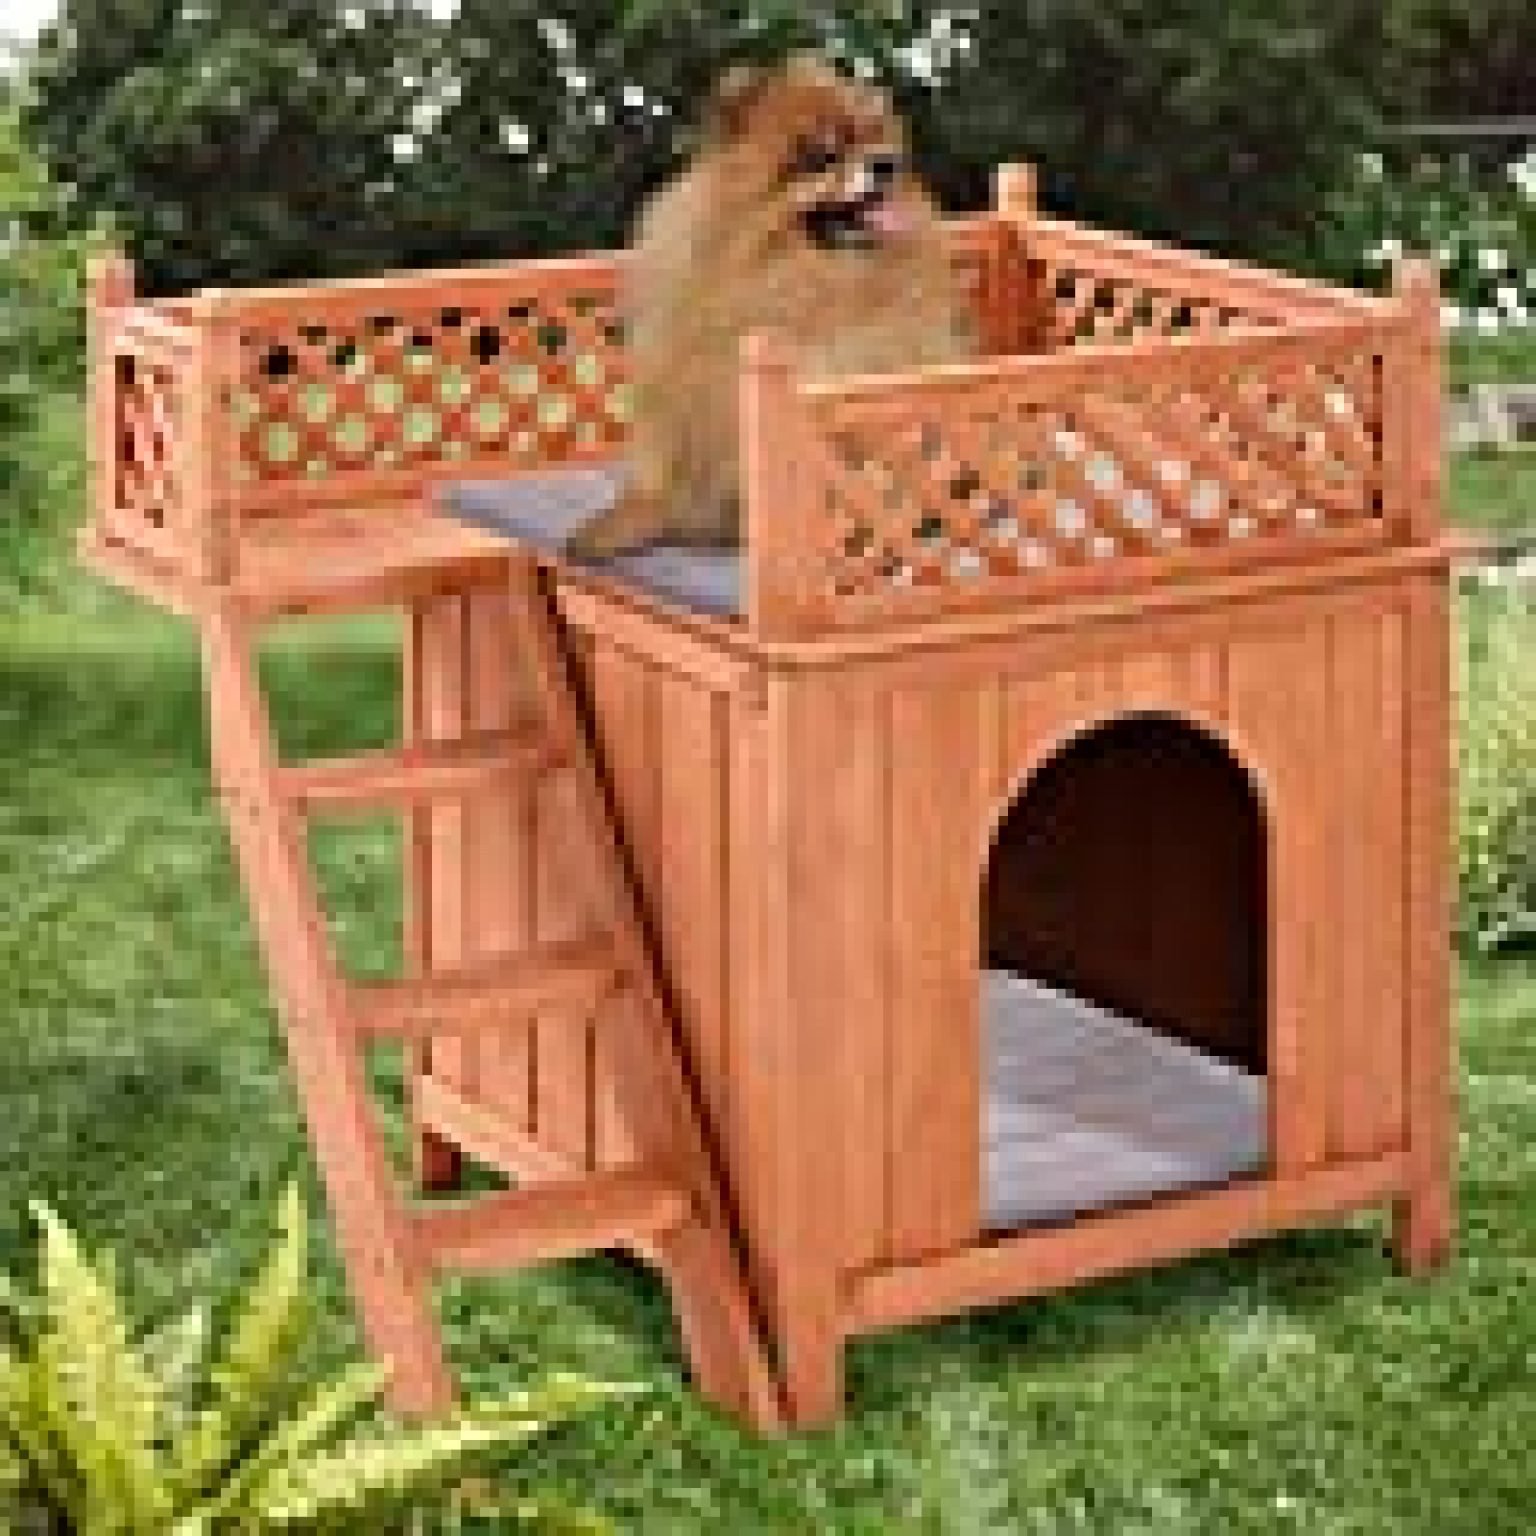 PETSITE Wooden Pet Dog House, Dog Room Shelter with Stairs, Puppy House